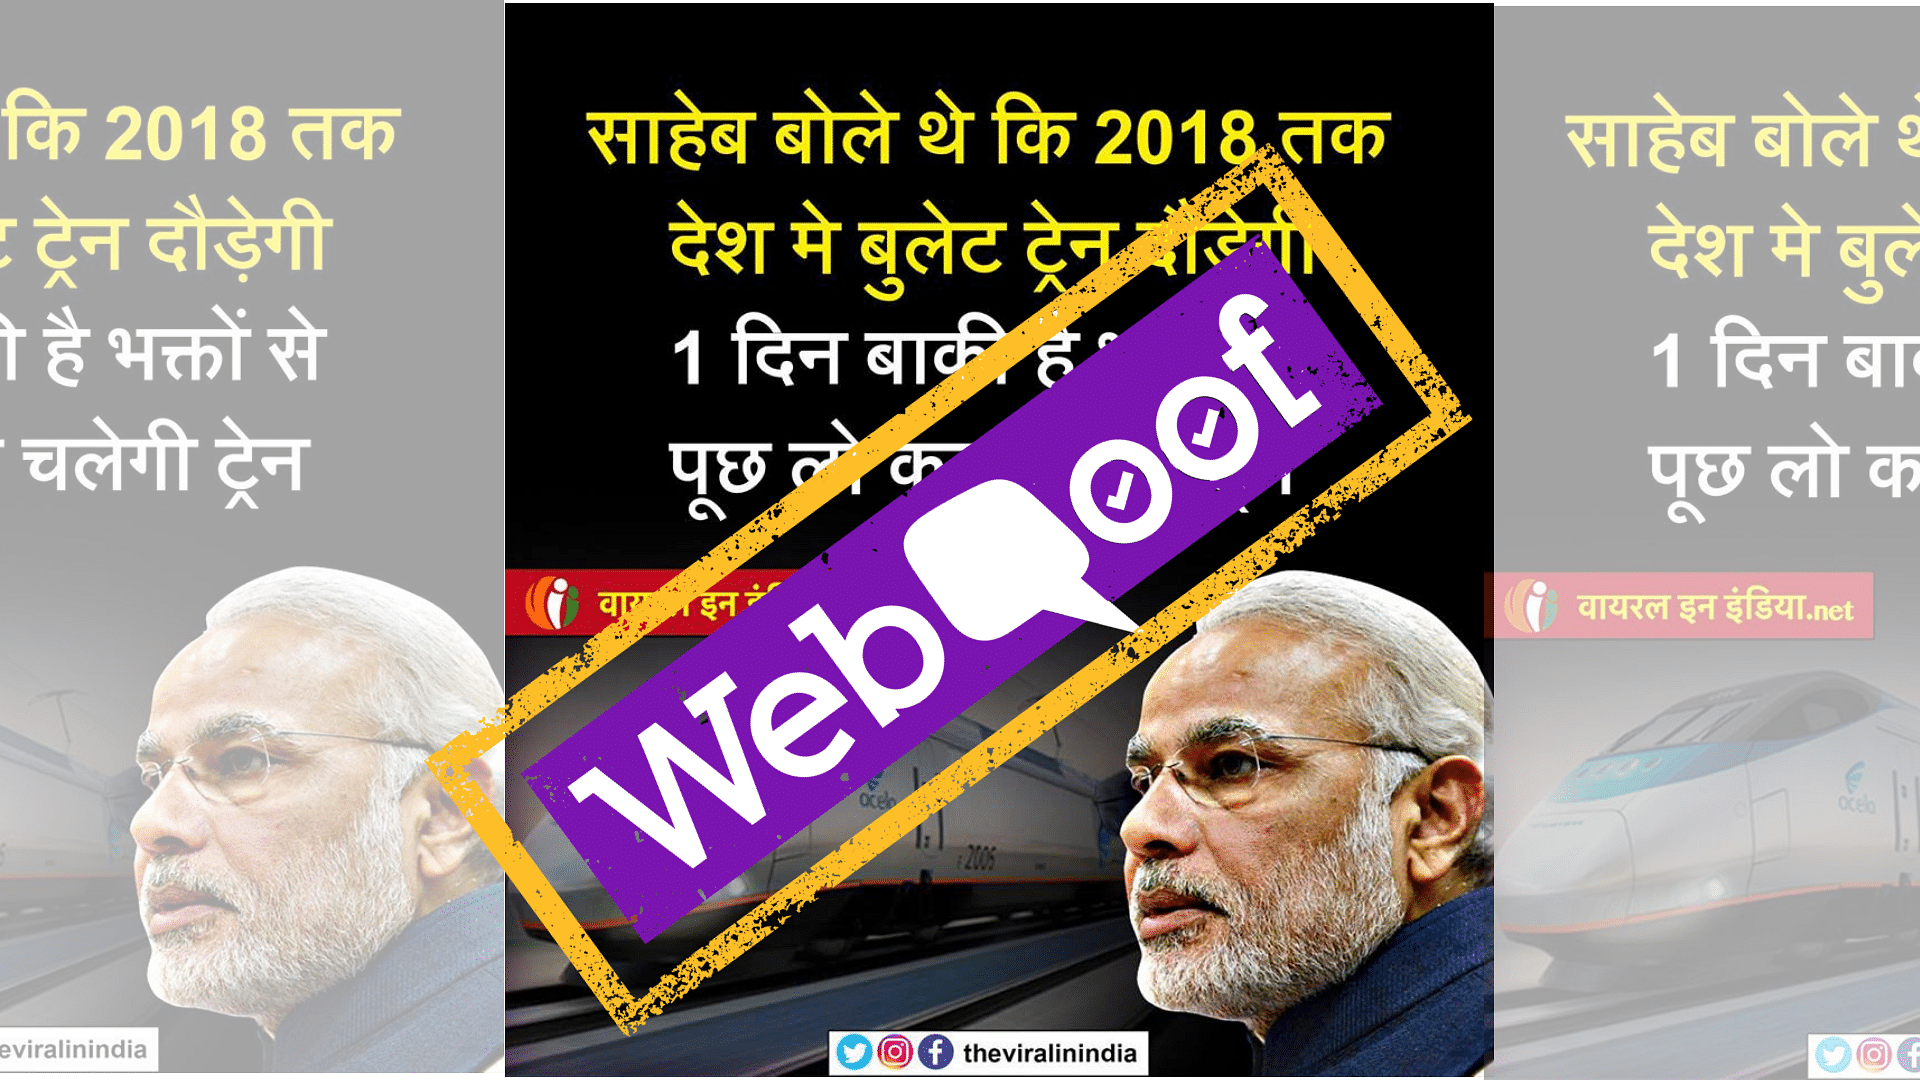 A post claiming PM Modi said bullet train will run by 2019 has gone viral.